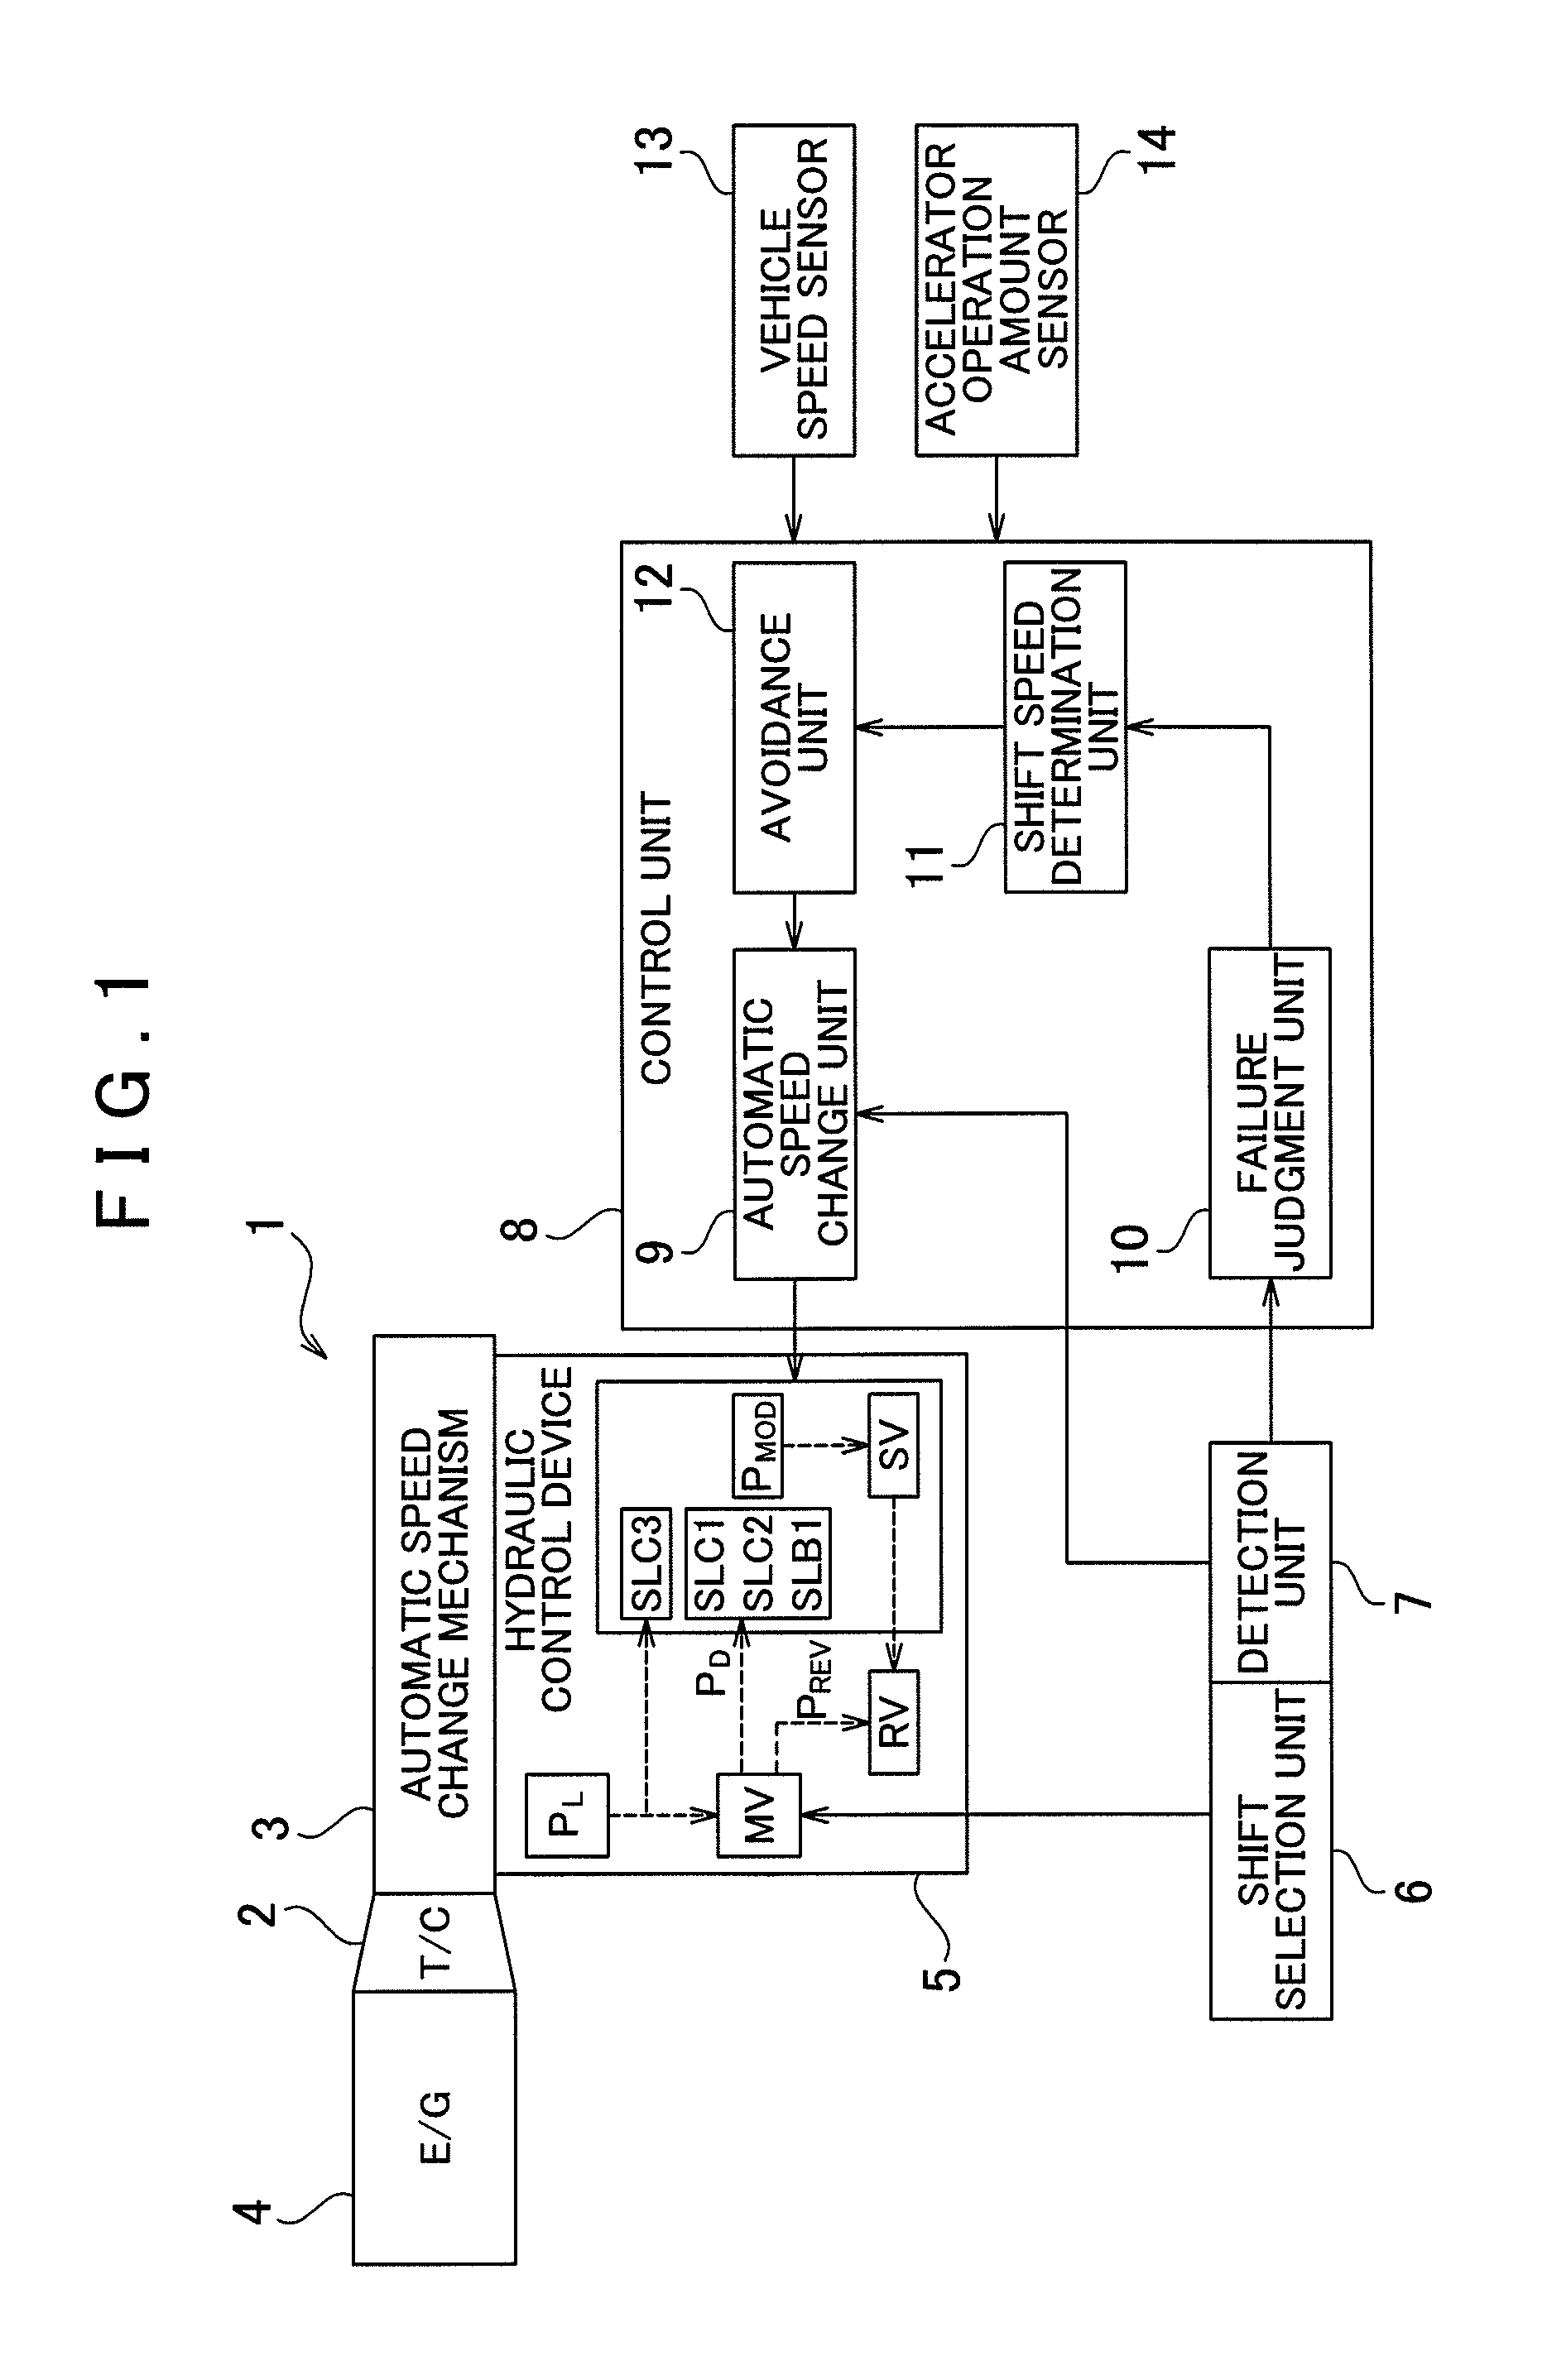 Control system for automatic transmission